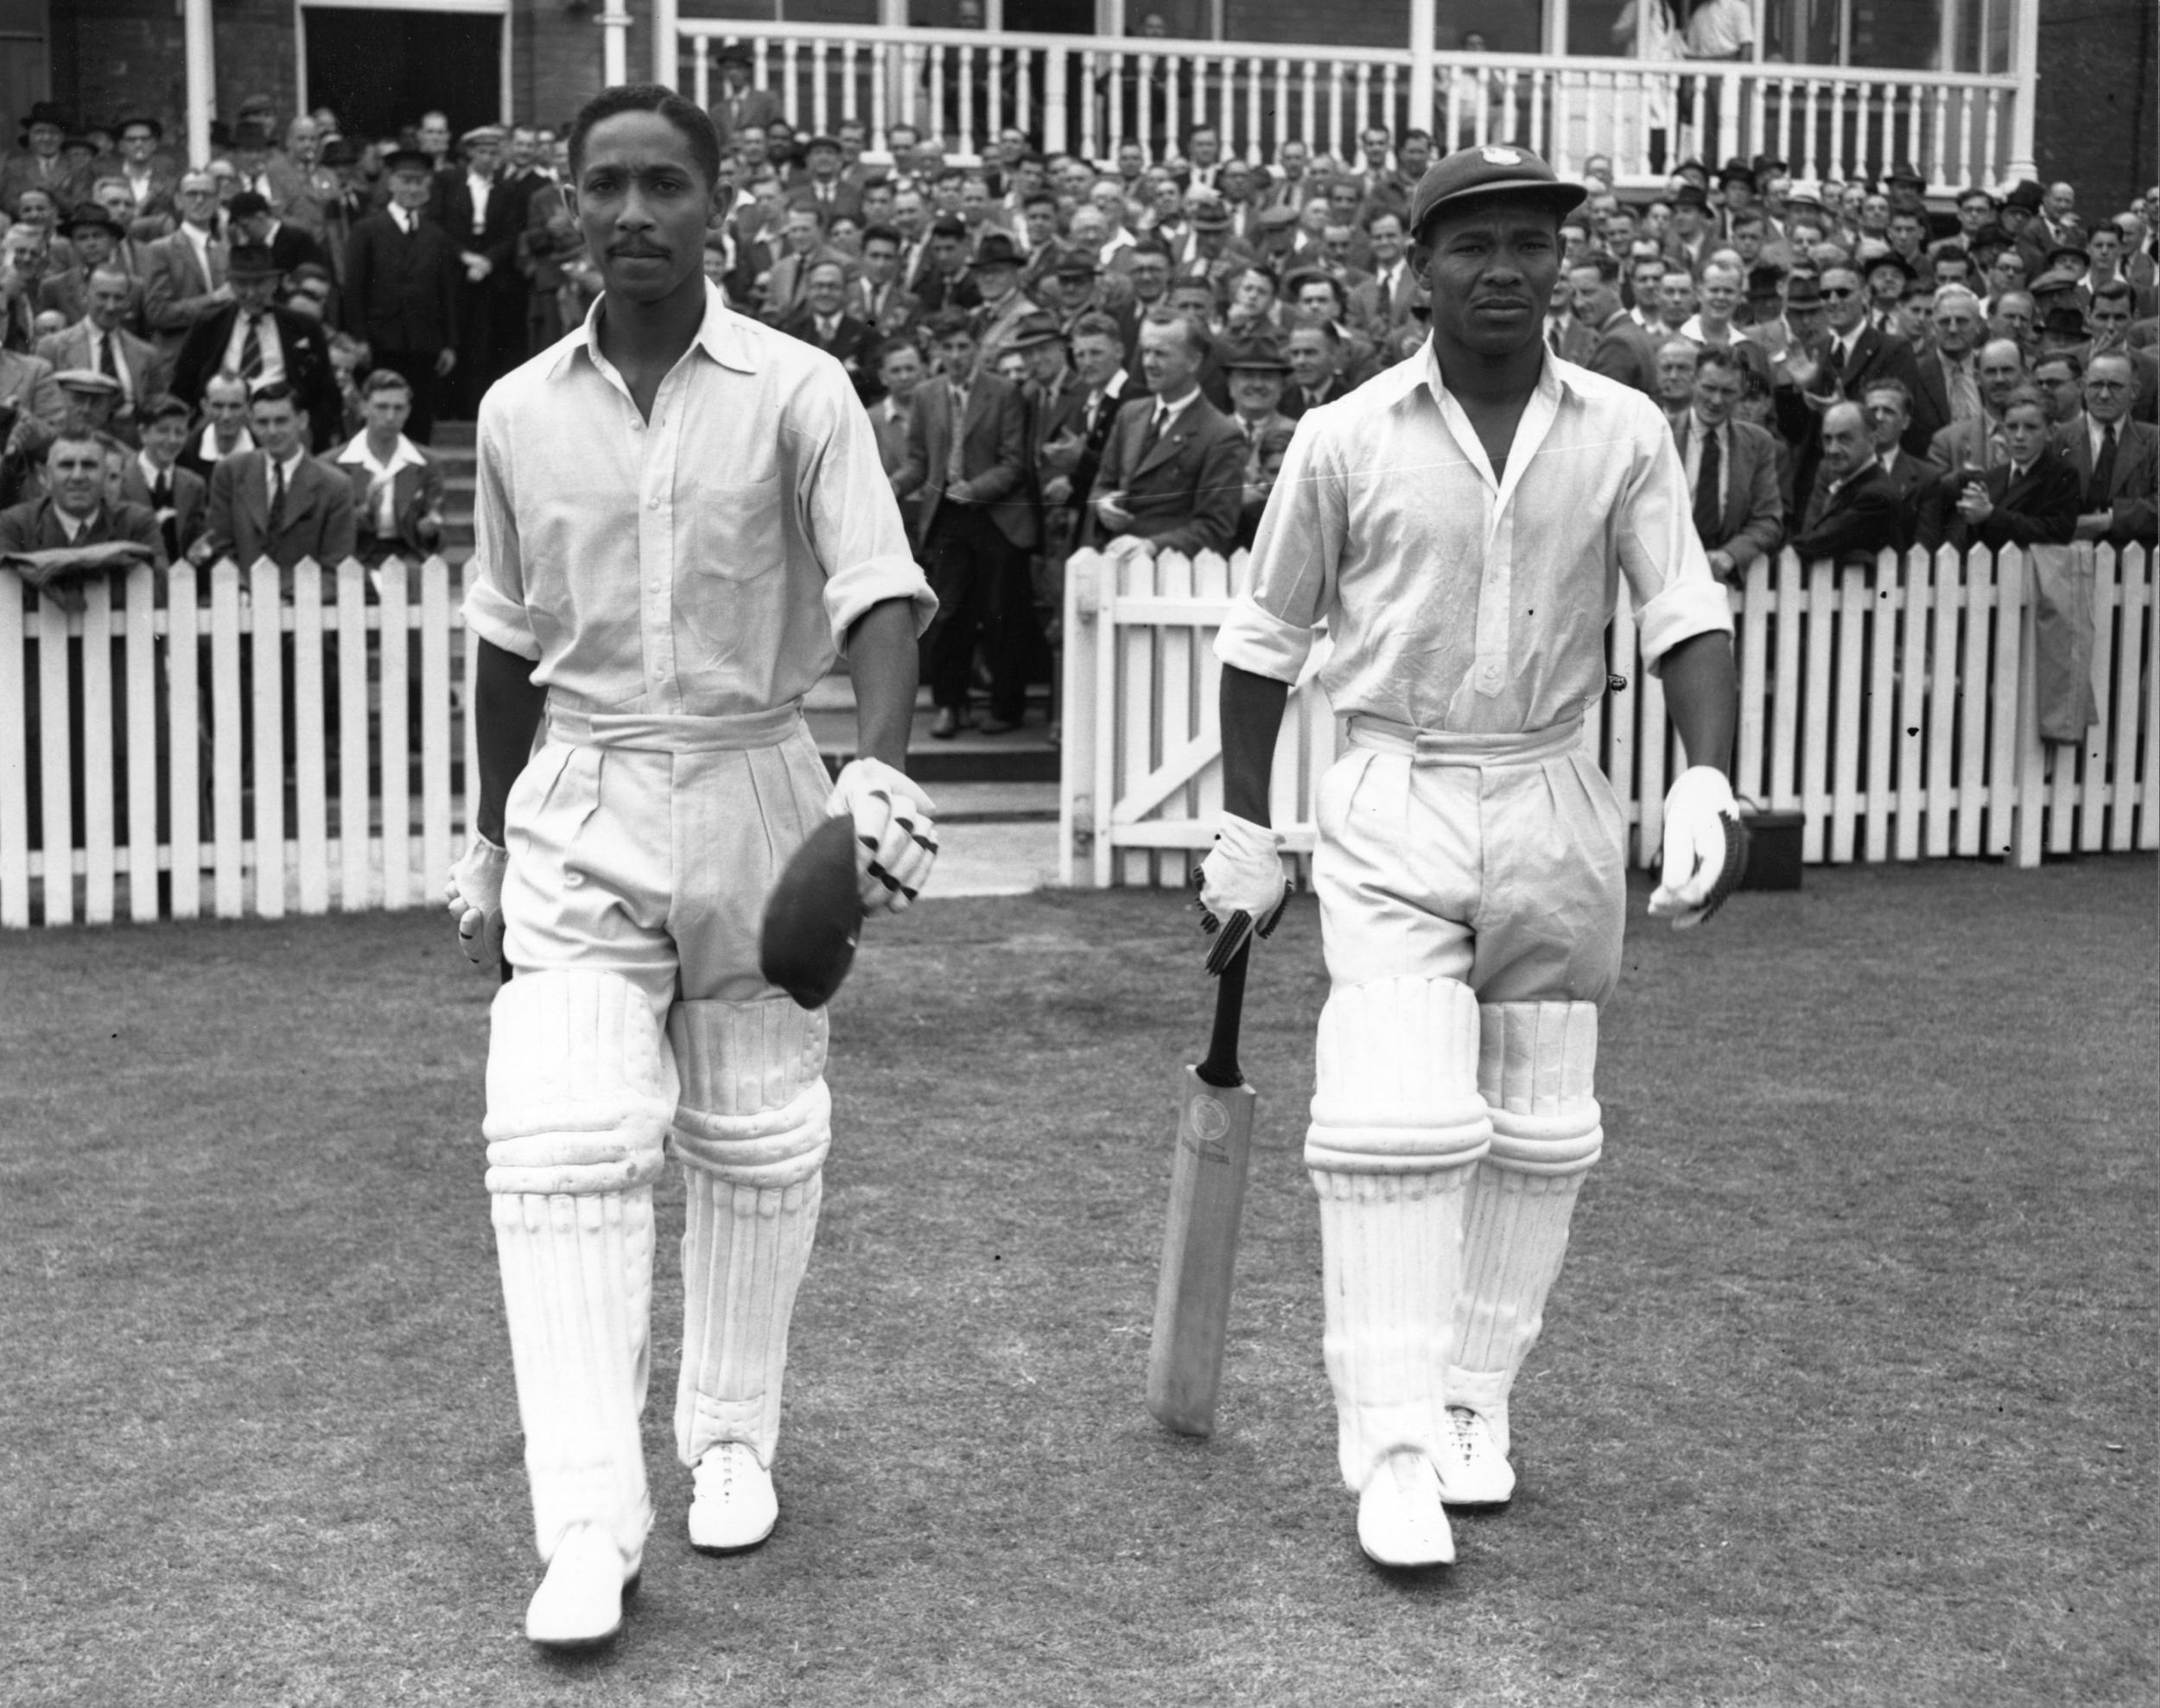 Weekes (right) walks out with Frank Worrell at Trent Bridge in 1950